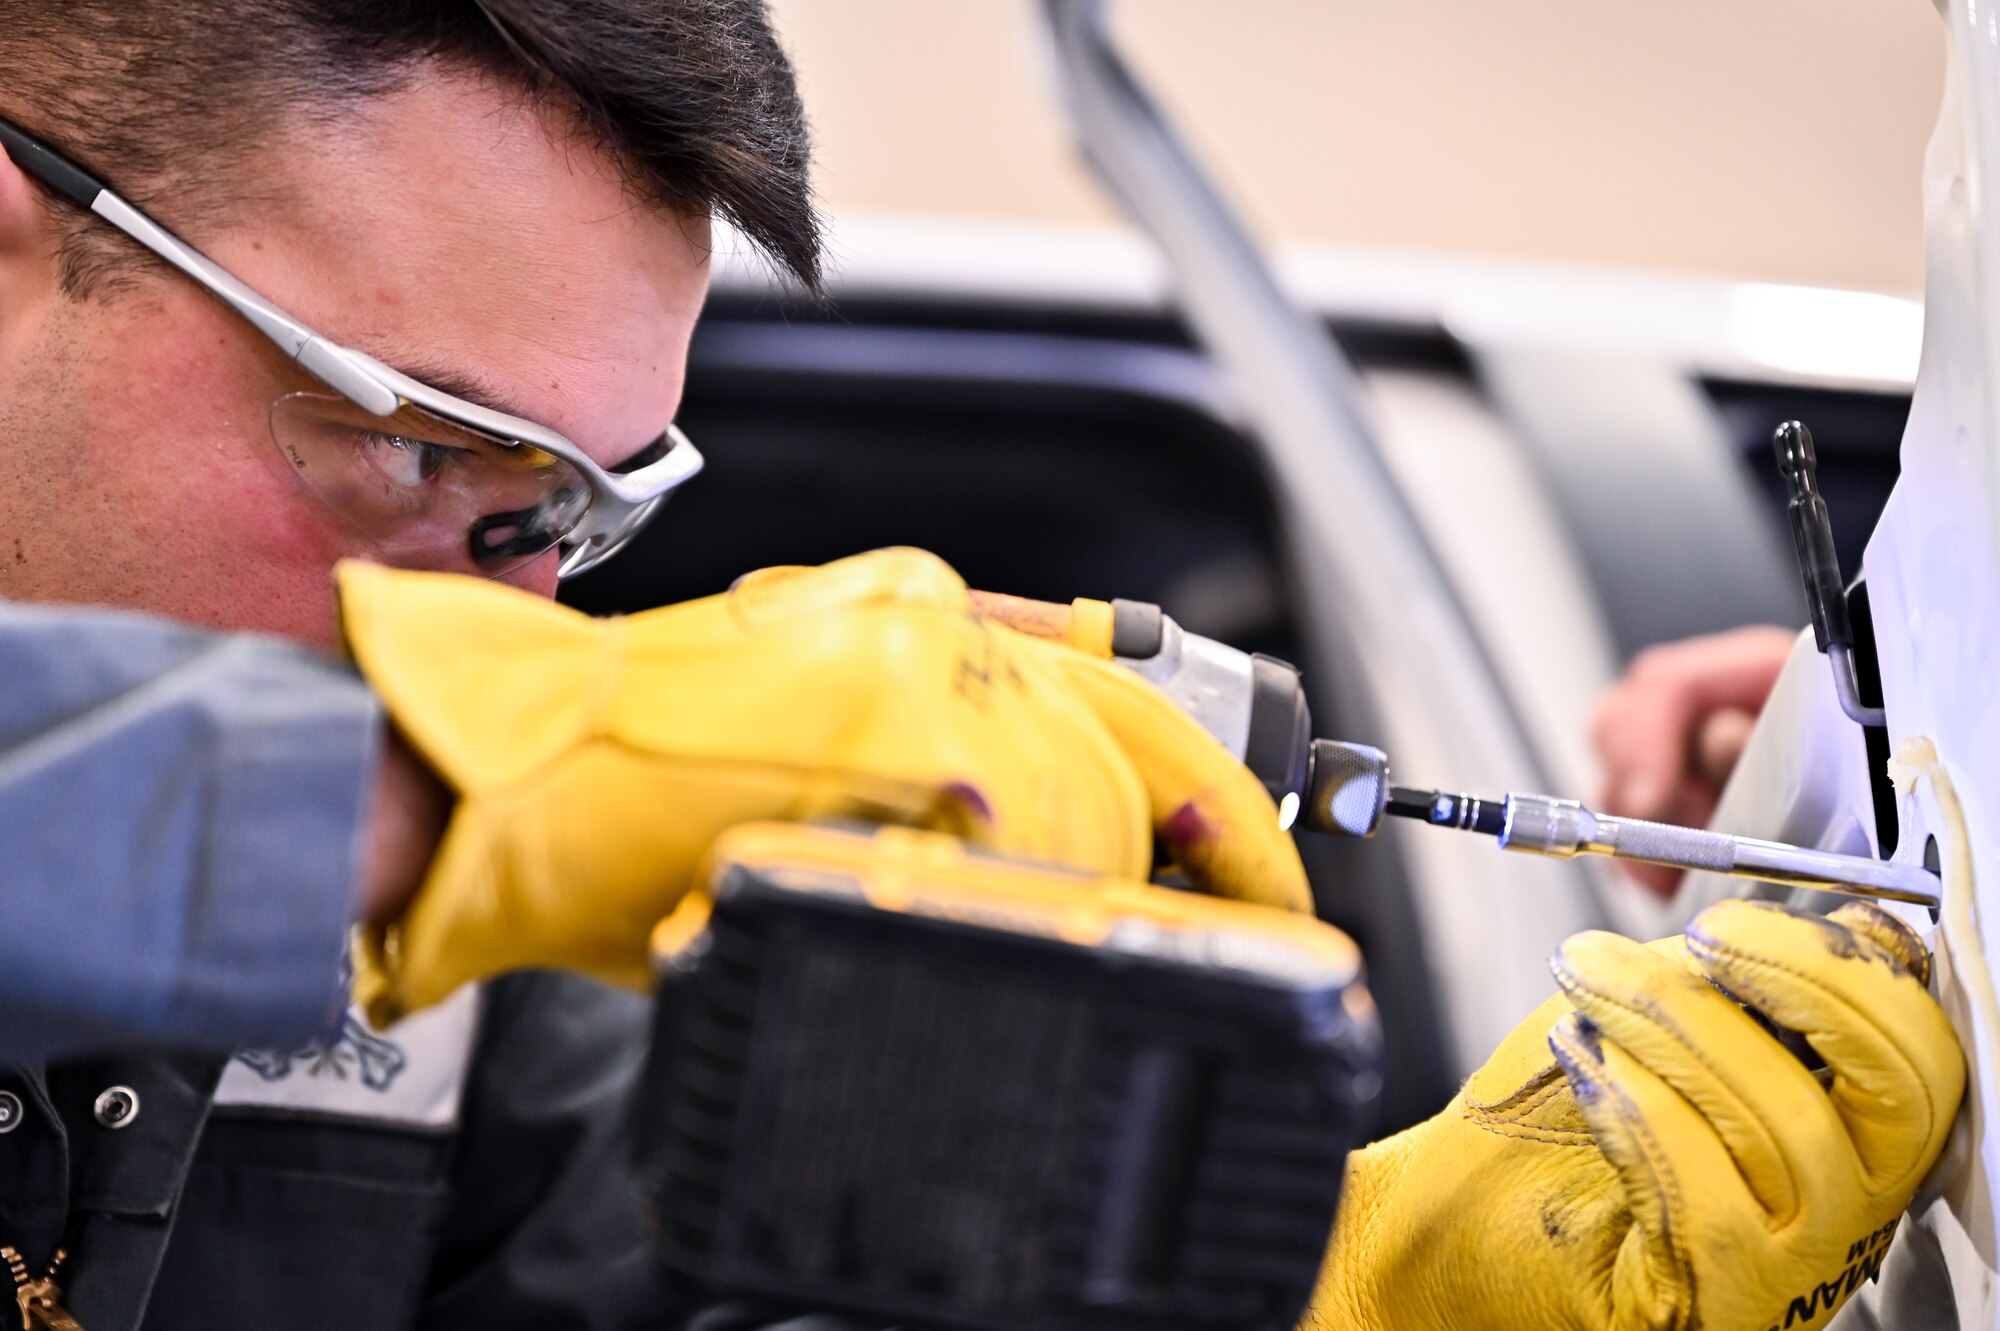 Airman 1st Class Marcos Orellana, 90th Logistics Readiness Squadron vehicle maintenance technician, removes a bolt from a Ford truck's rear passenger door to replace the door after it was damaged on F.E. Warren Air Force Base, Wyoming, Nov. 29, 2022. Orellana is assigned to the body shop to learn basic skills he can use on future deployments. With more than 40 years of experience, the 90 LRS Monster Garage or body shop team is repairing the 90th Missile Wing fleet while supporting the Air Force Global Strike priority of people by finding ways to train the next generation of Airmen and find innovative solutions. (U.S. Air Force photo by Joseph Coslett Jr.)